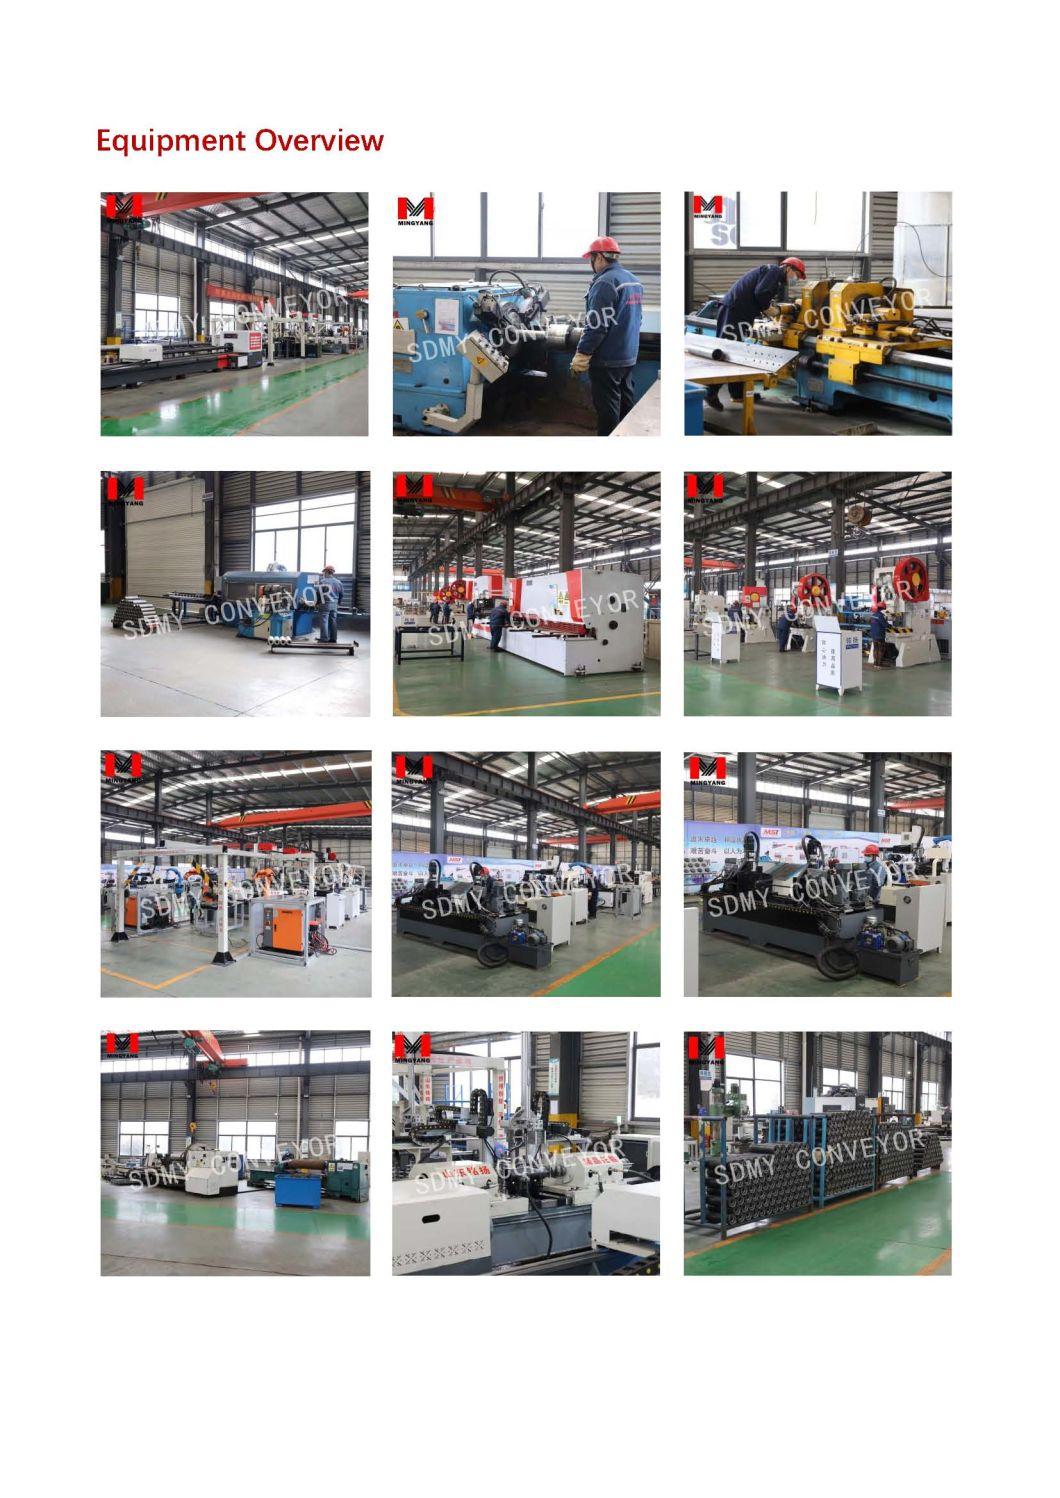 Steel Self-Cleaning Pulley of Conveyor Belt System